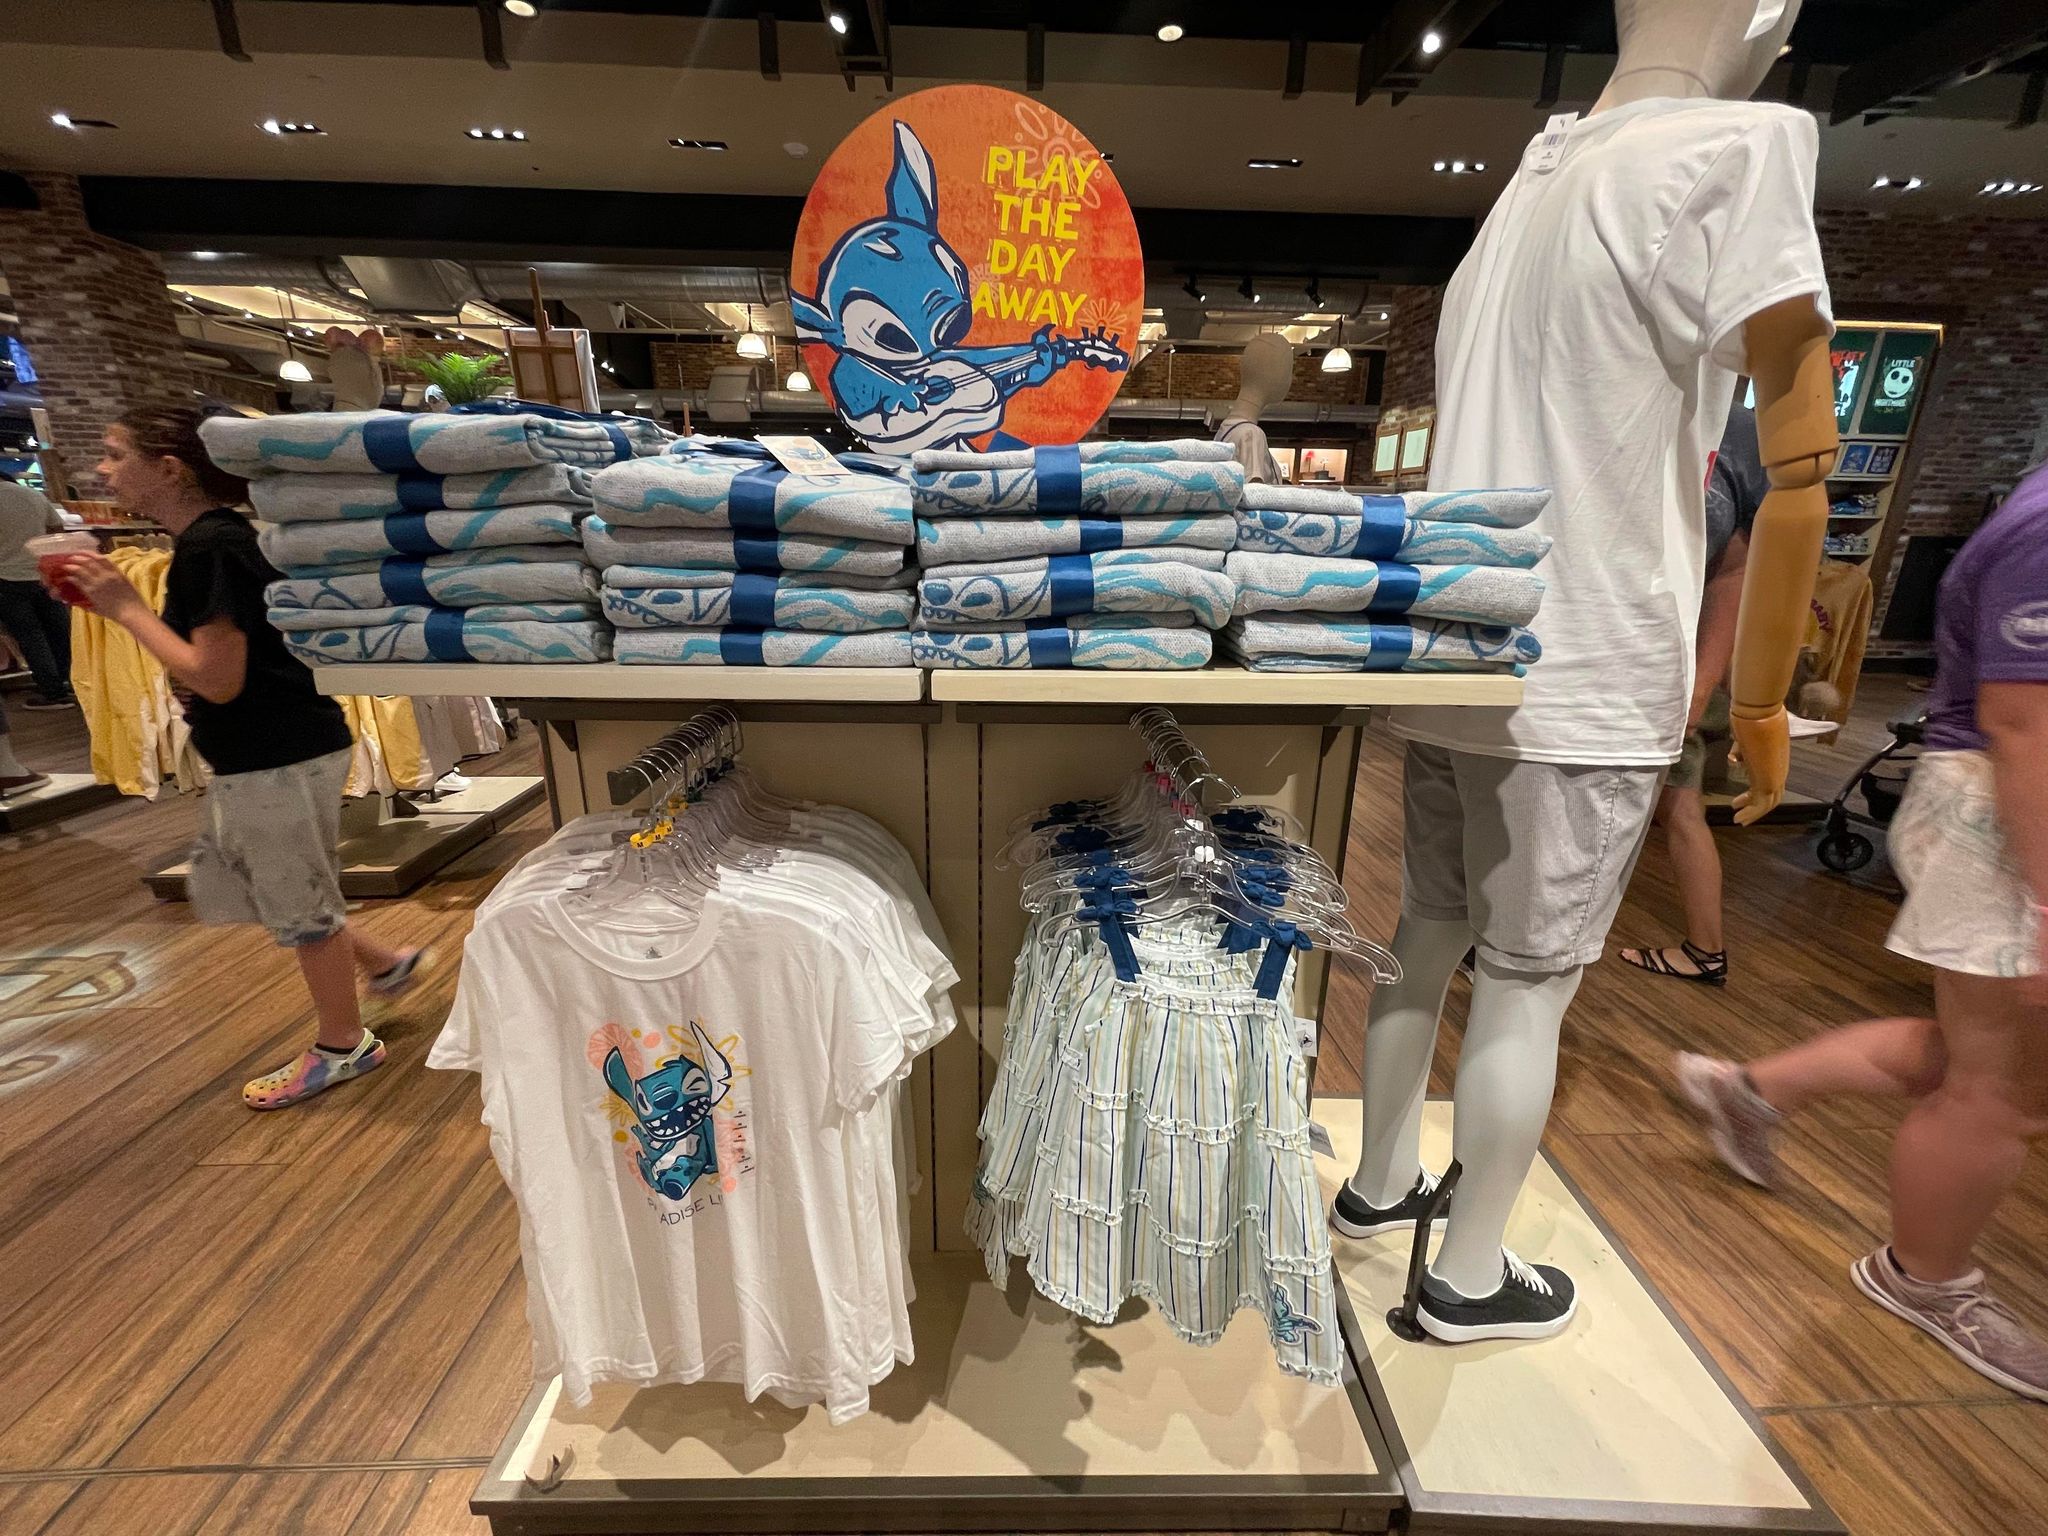 Stitch Stands (and Spits) Over the Entrance to World of Disney at Disney  Springs – Ink and Paint in the Parks